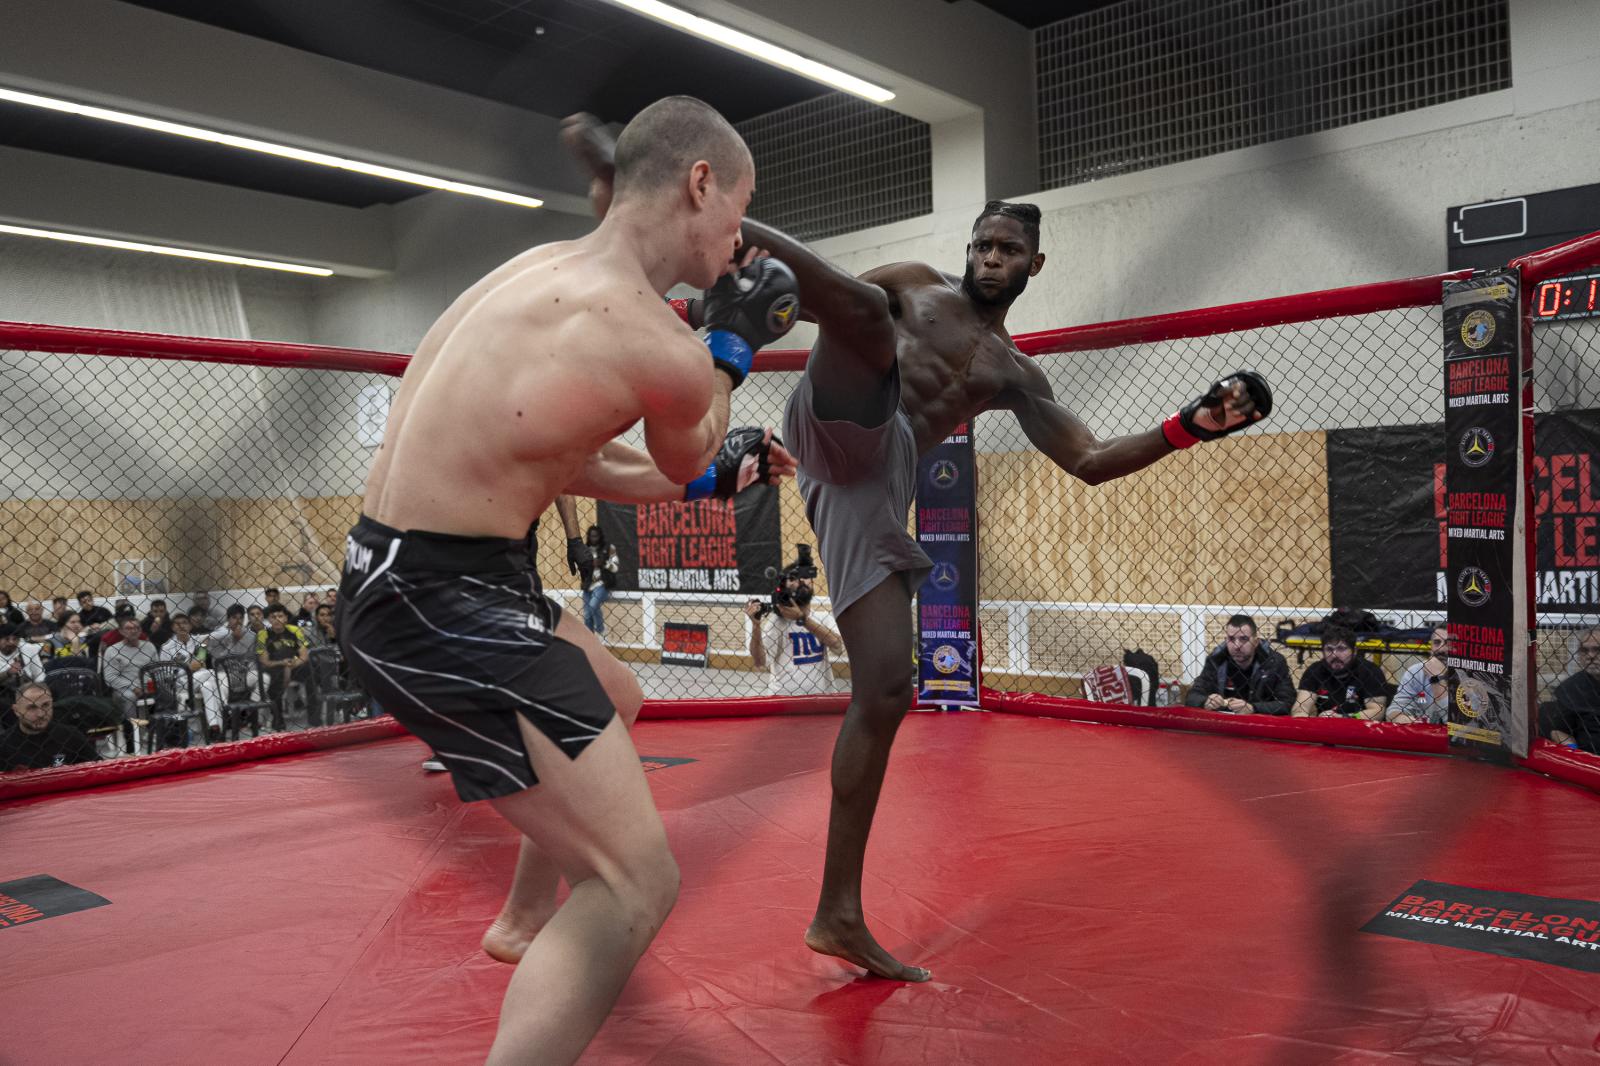 Image from DAILY NEWS - Amateur MMA fight at the Barcelona Fight League held on...